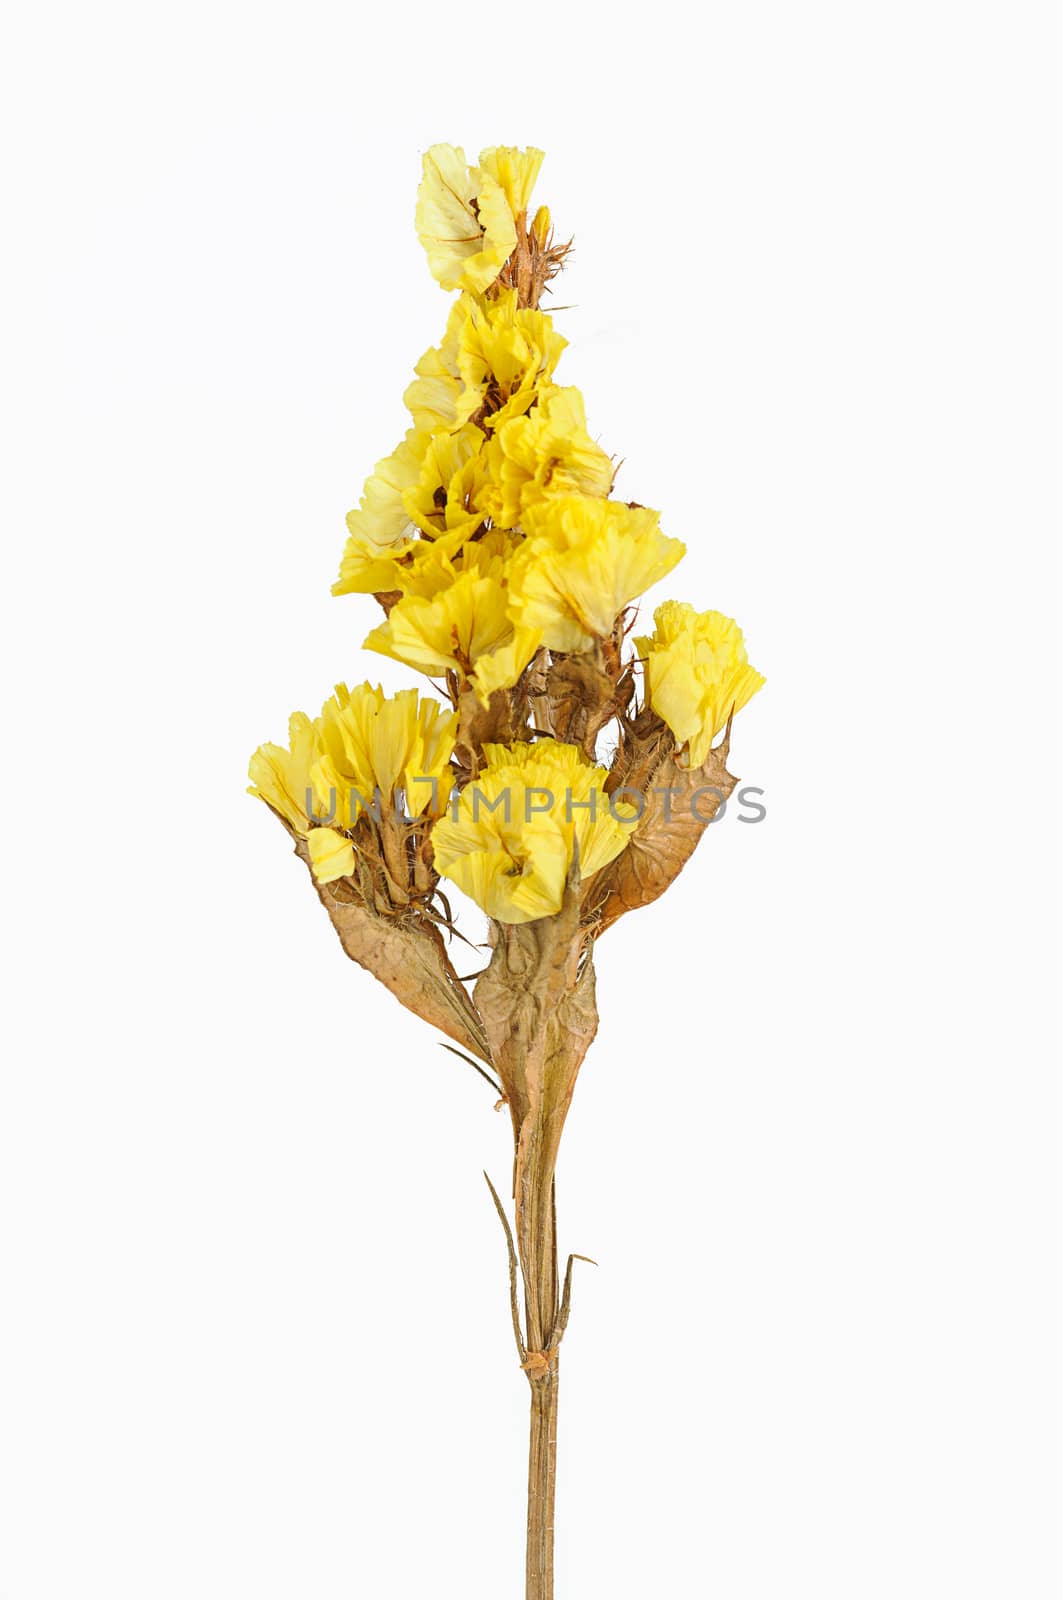 Dry flower isolated on white background